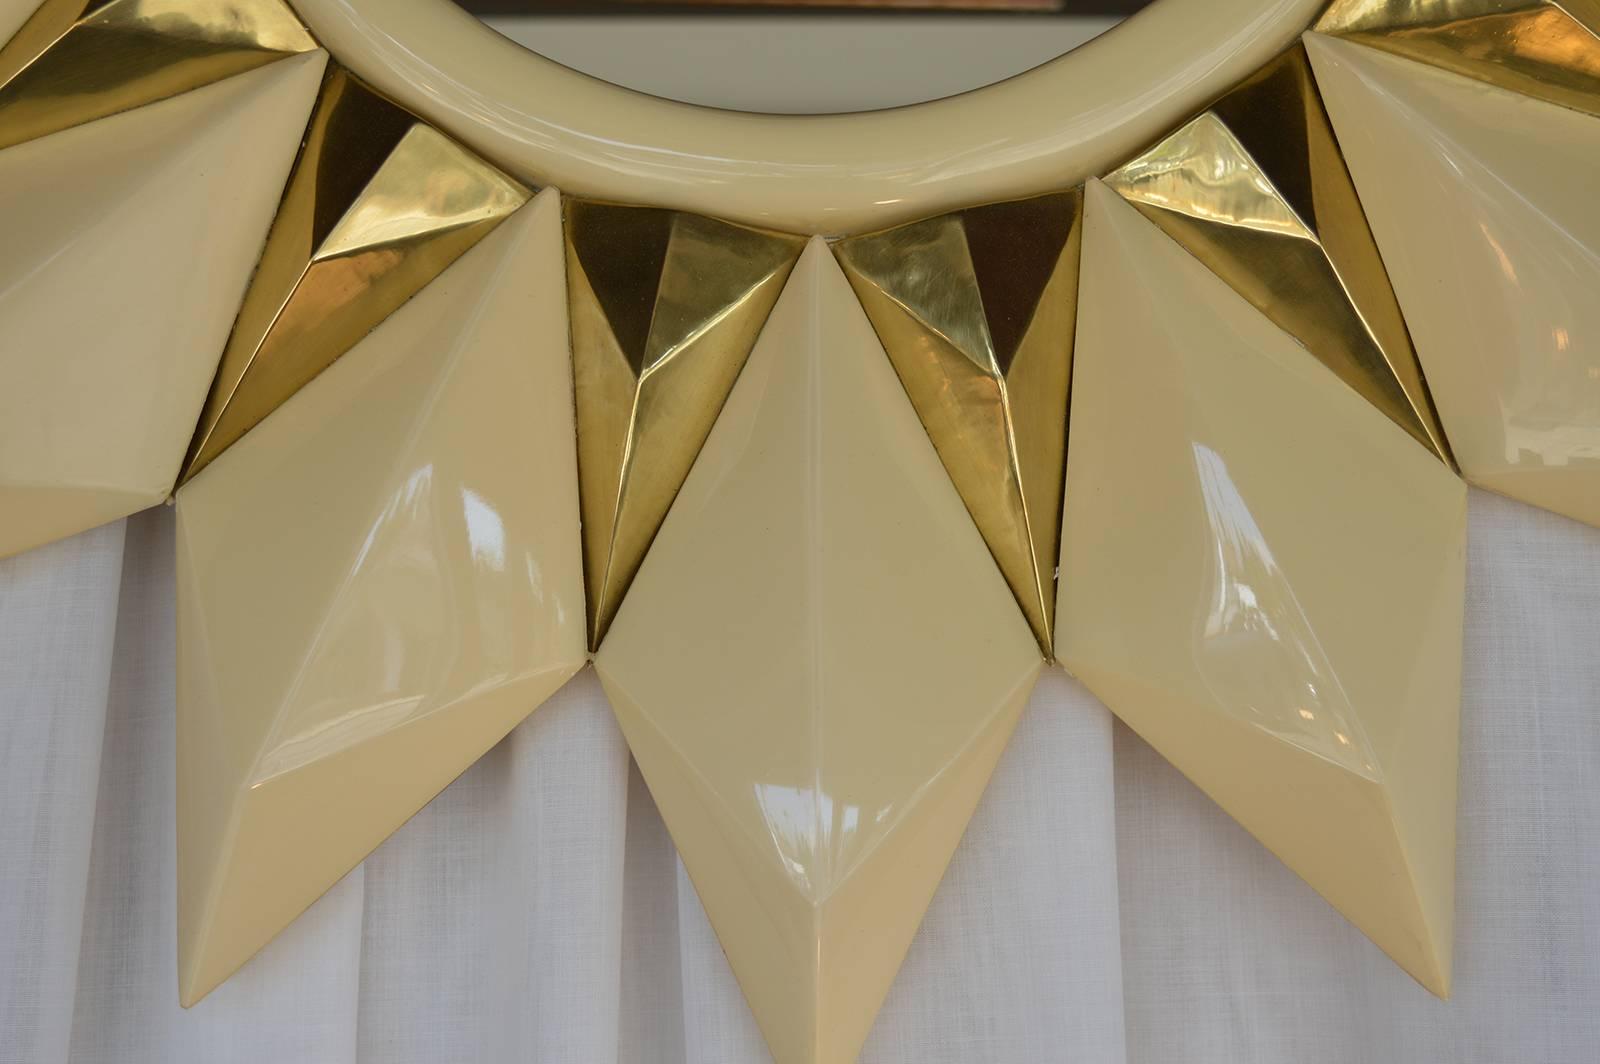 Pair of sunburst mirrors. Wood frames painted in a cream lacquer with brass accents.